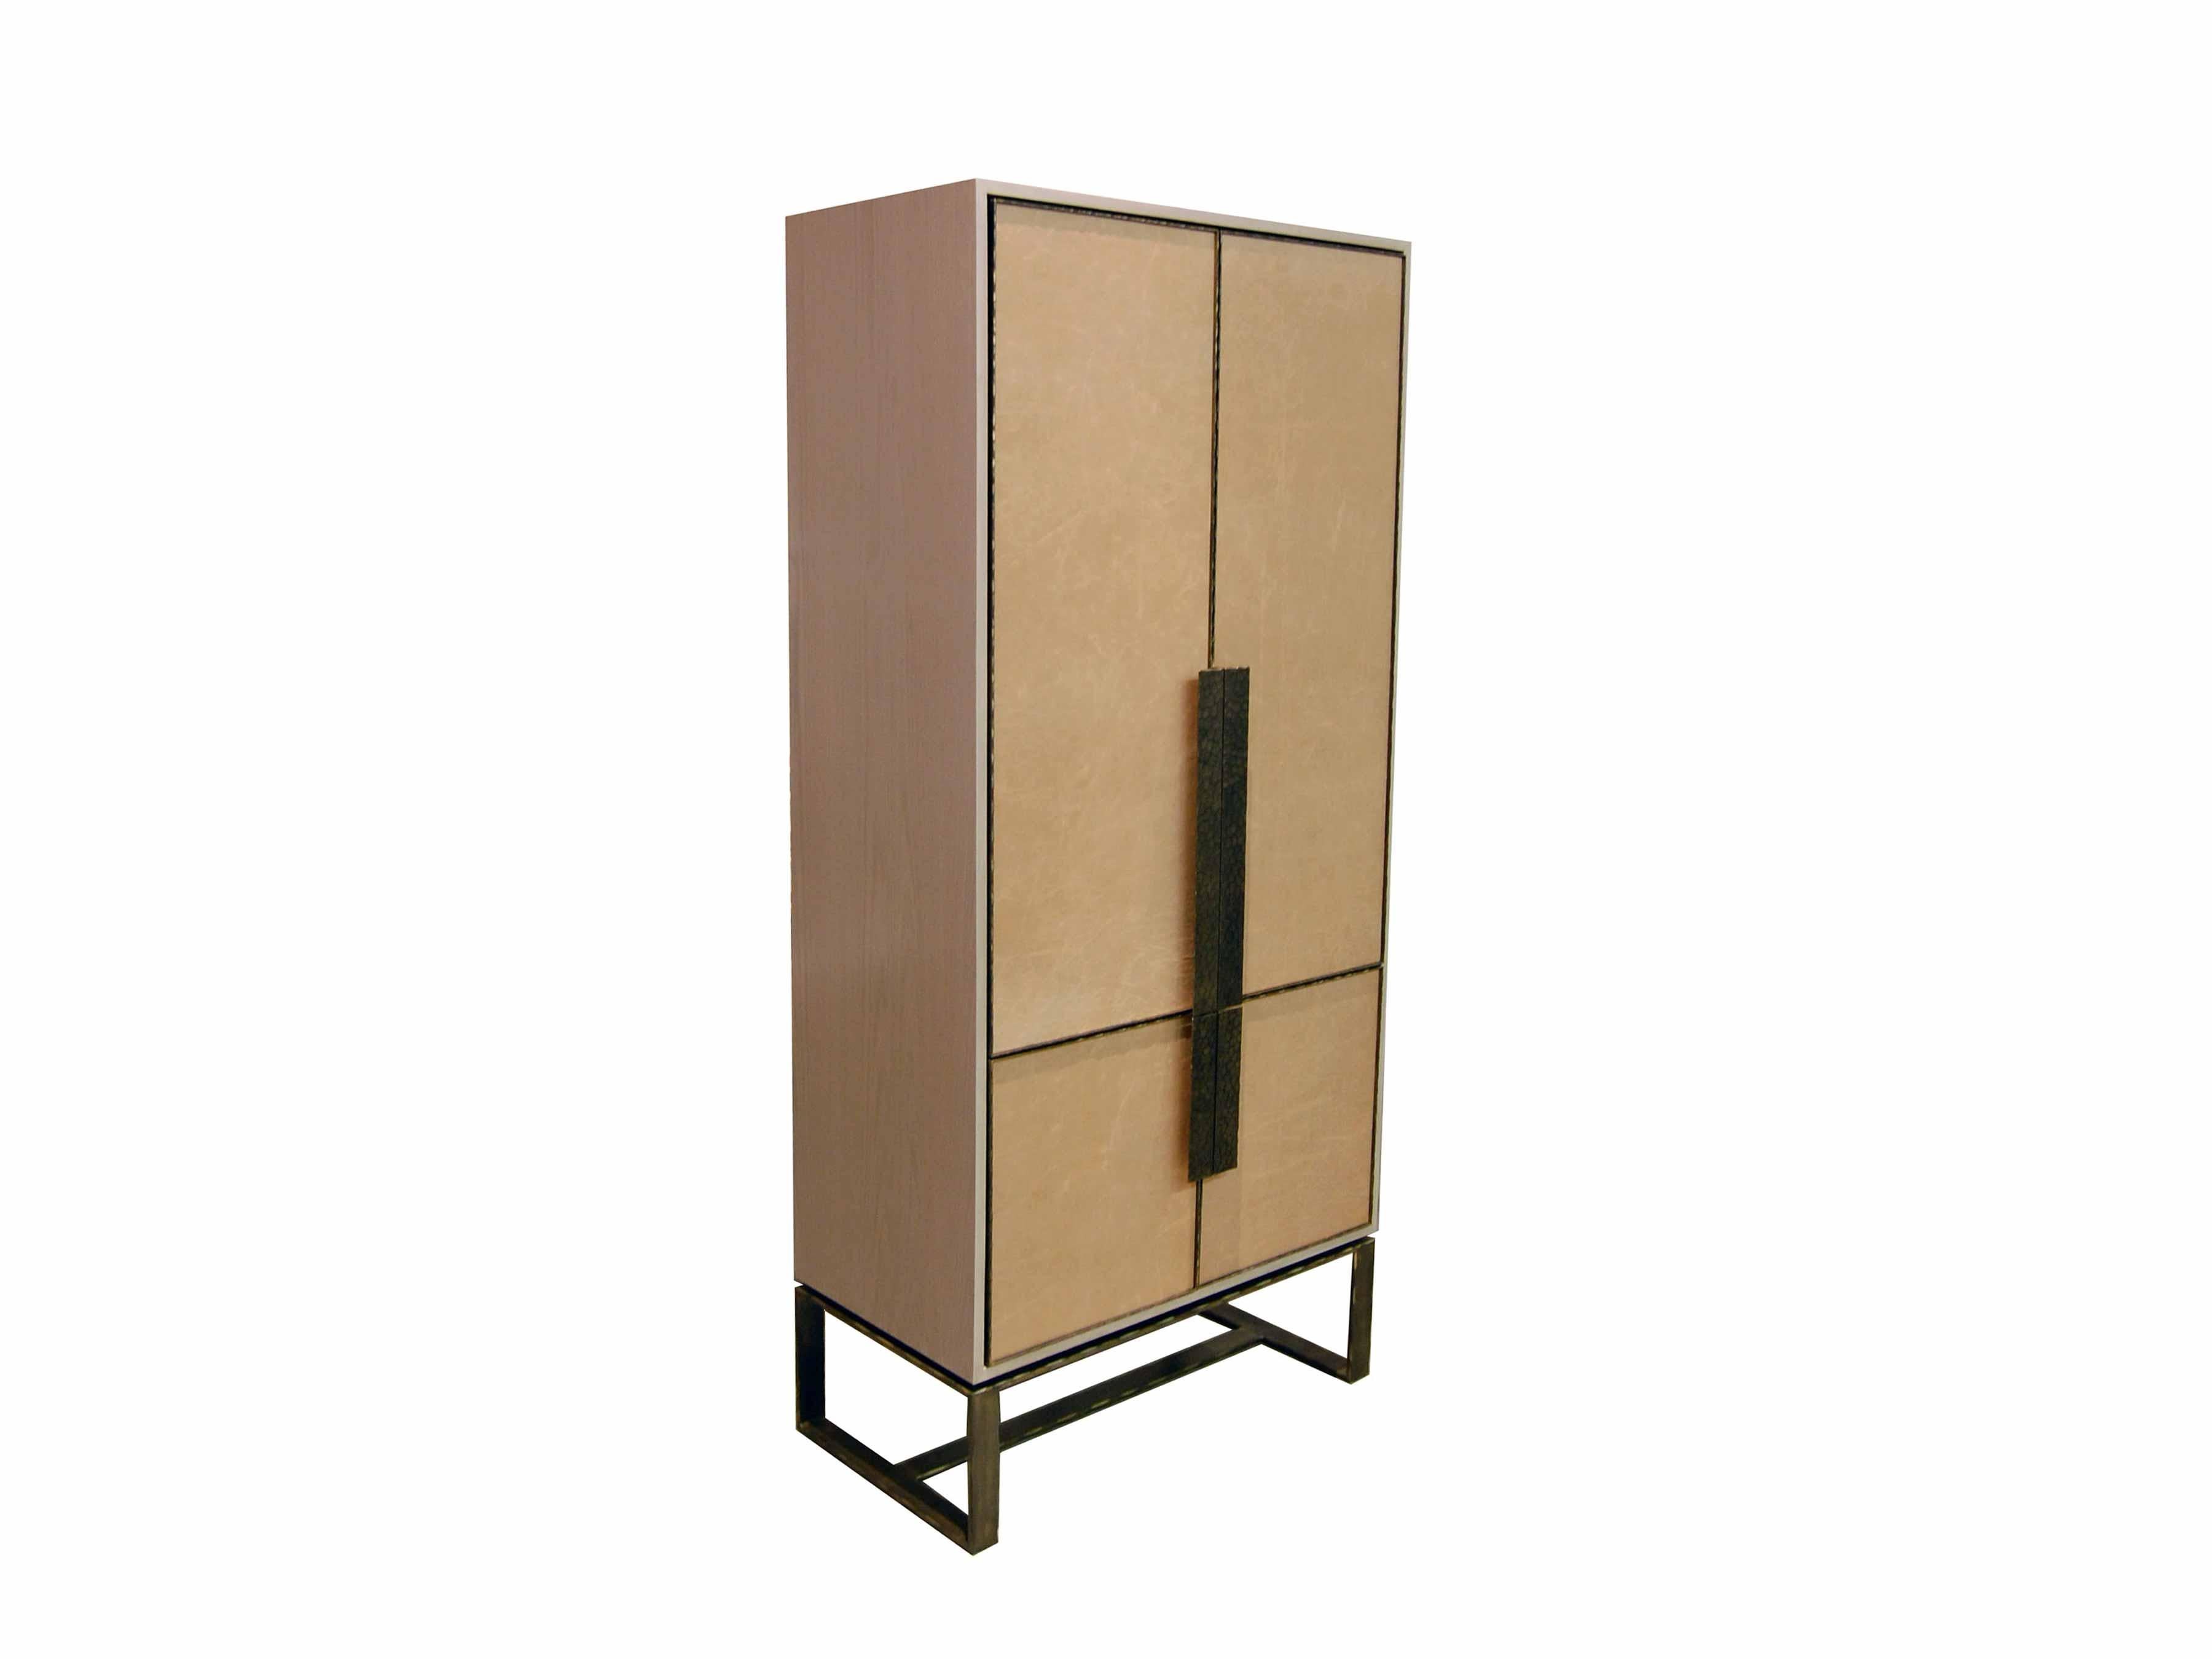 The Chelsea bar cabinet by Ercole Home has a 4-door front, with sand wood finish on oak.
Hand-stretched leather in sand brown decorates the door fronts.
Hand-hammered metal framed doors, handles, and base in dark bronze metal finish.
The cabinet